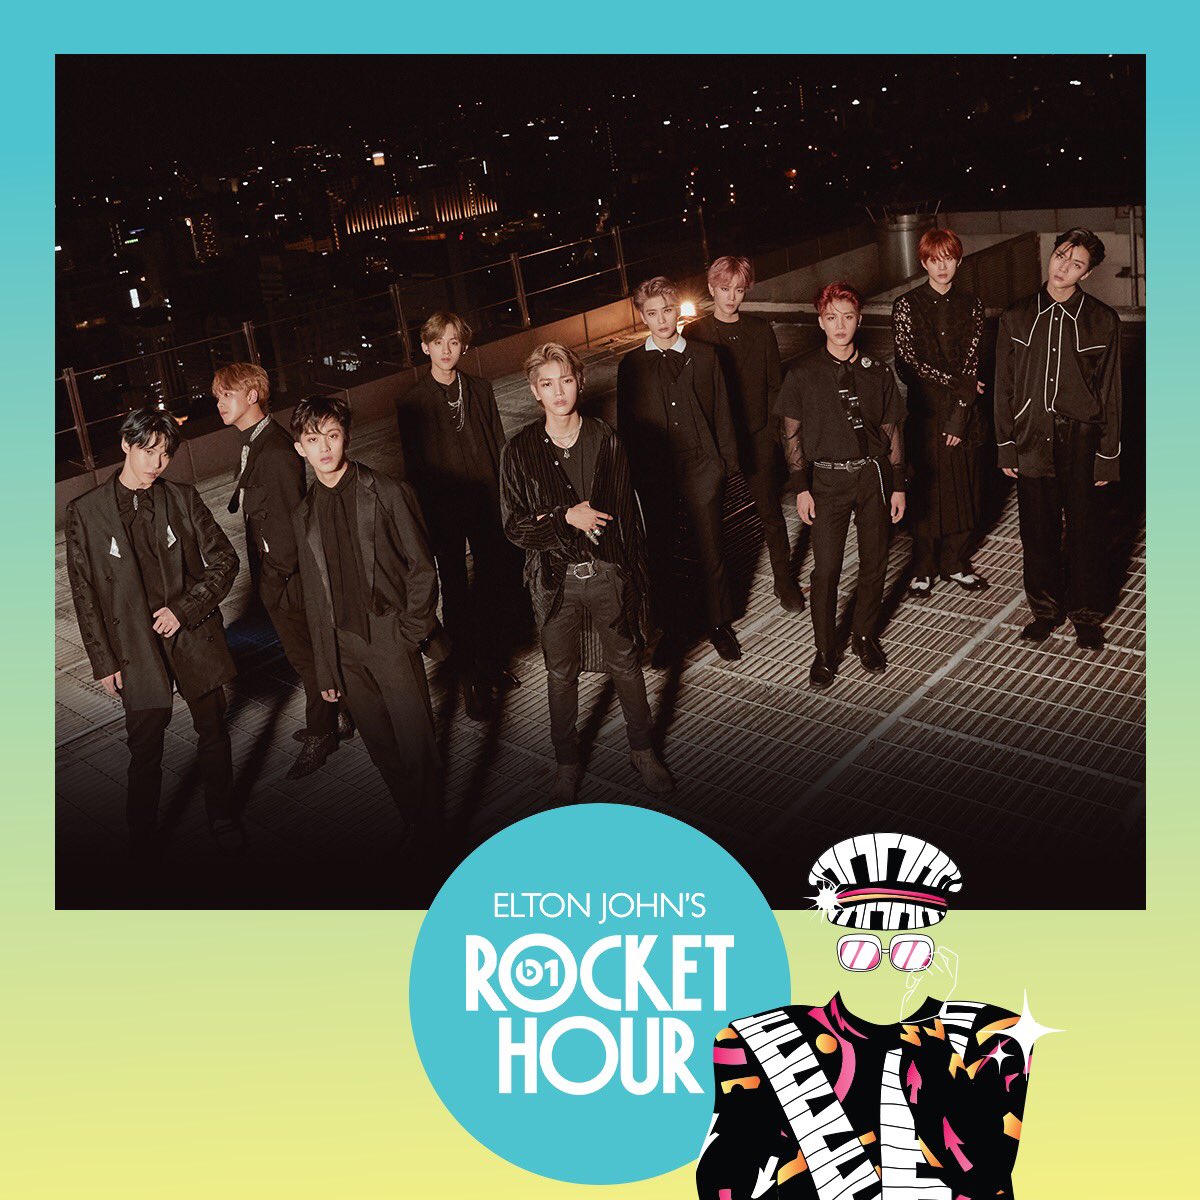 #NCTzen! It’s time for #RocketHour!!

Listen now: apple.co/eltonlive

Tune in again tomorrow 10/28 at 6pm PST ✊🏻💚

@Beats1 @EltonOfficial #NCT #NCT127